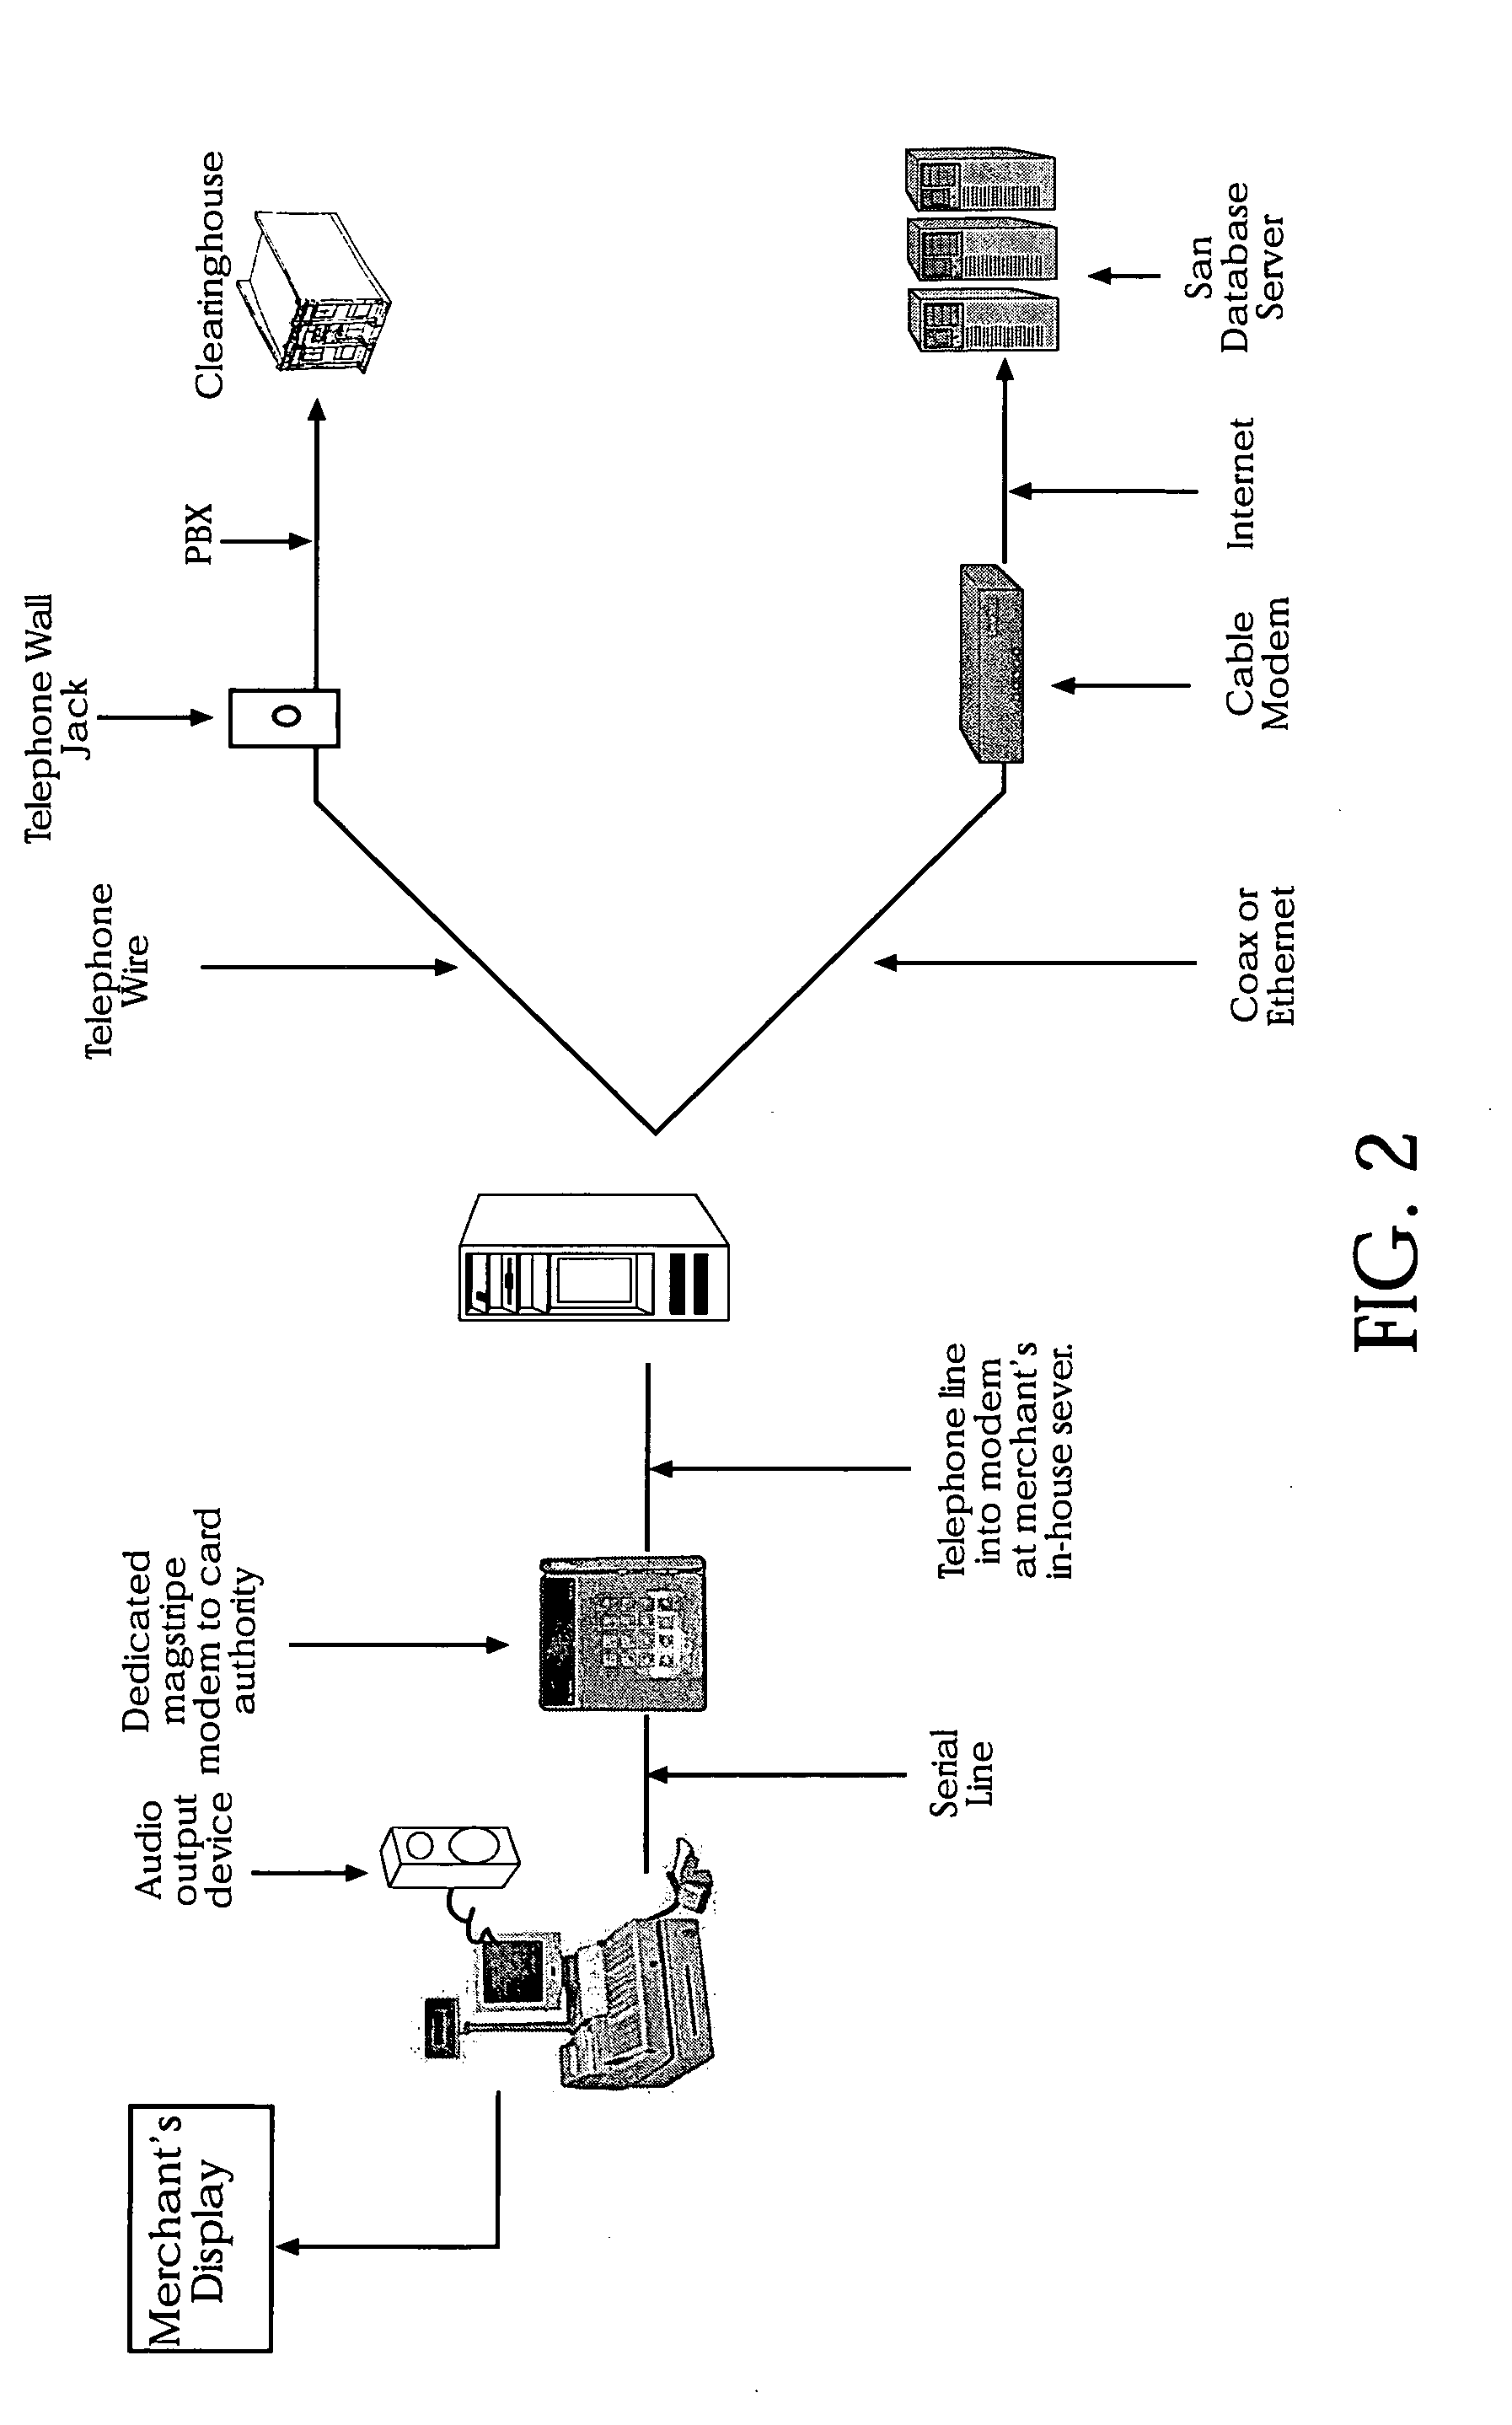 System and method for customer video authentication to prevent identity theft